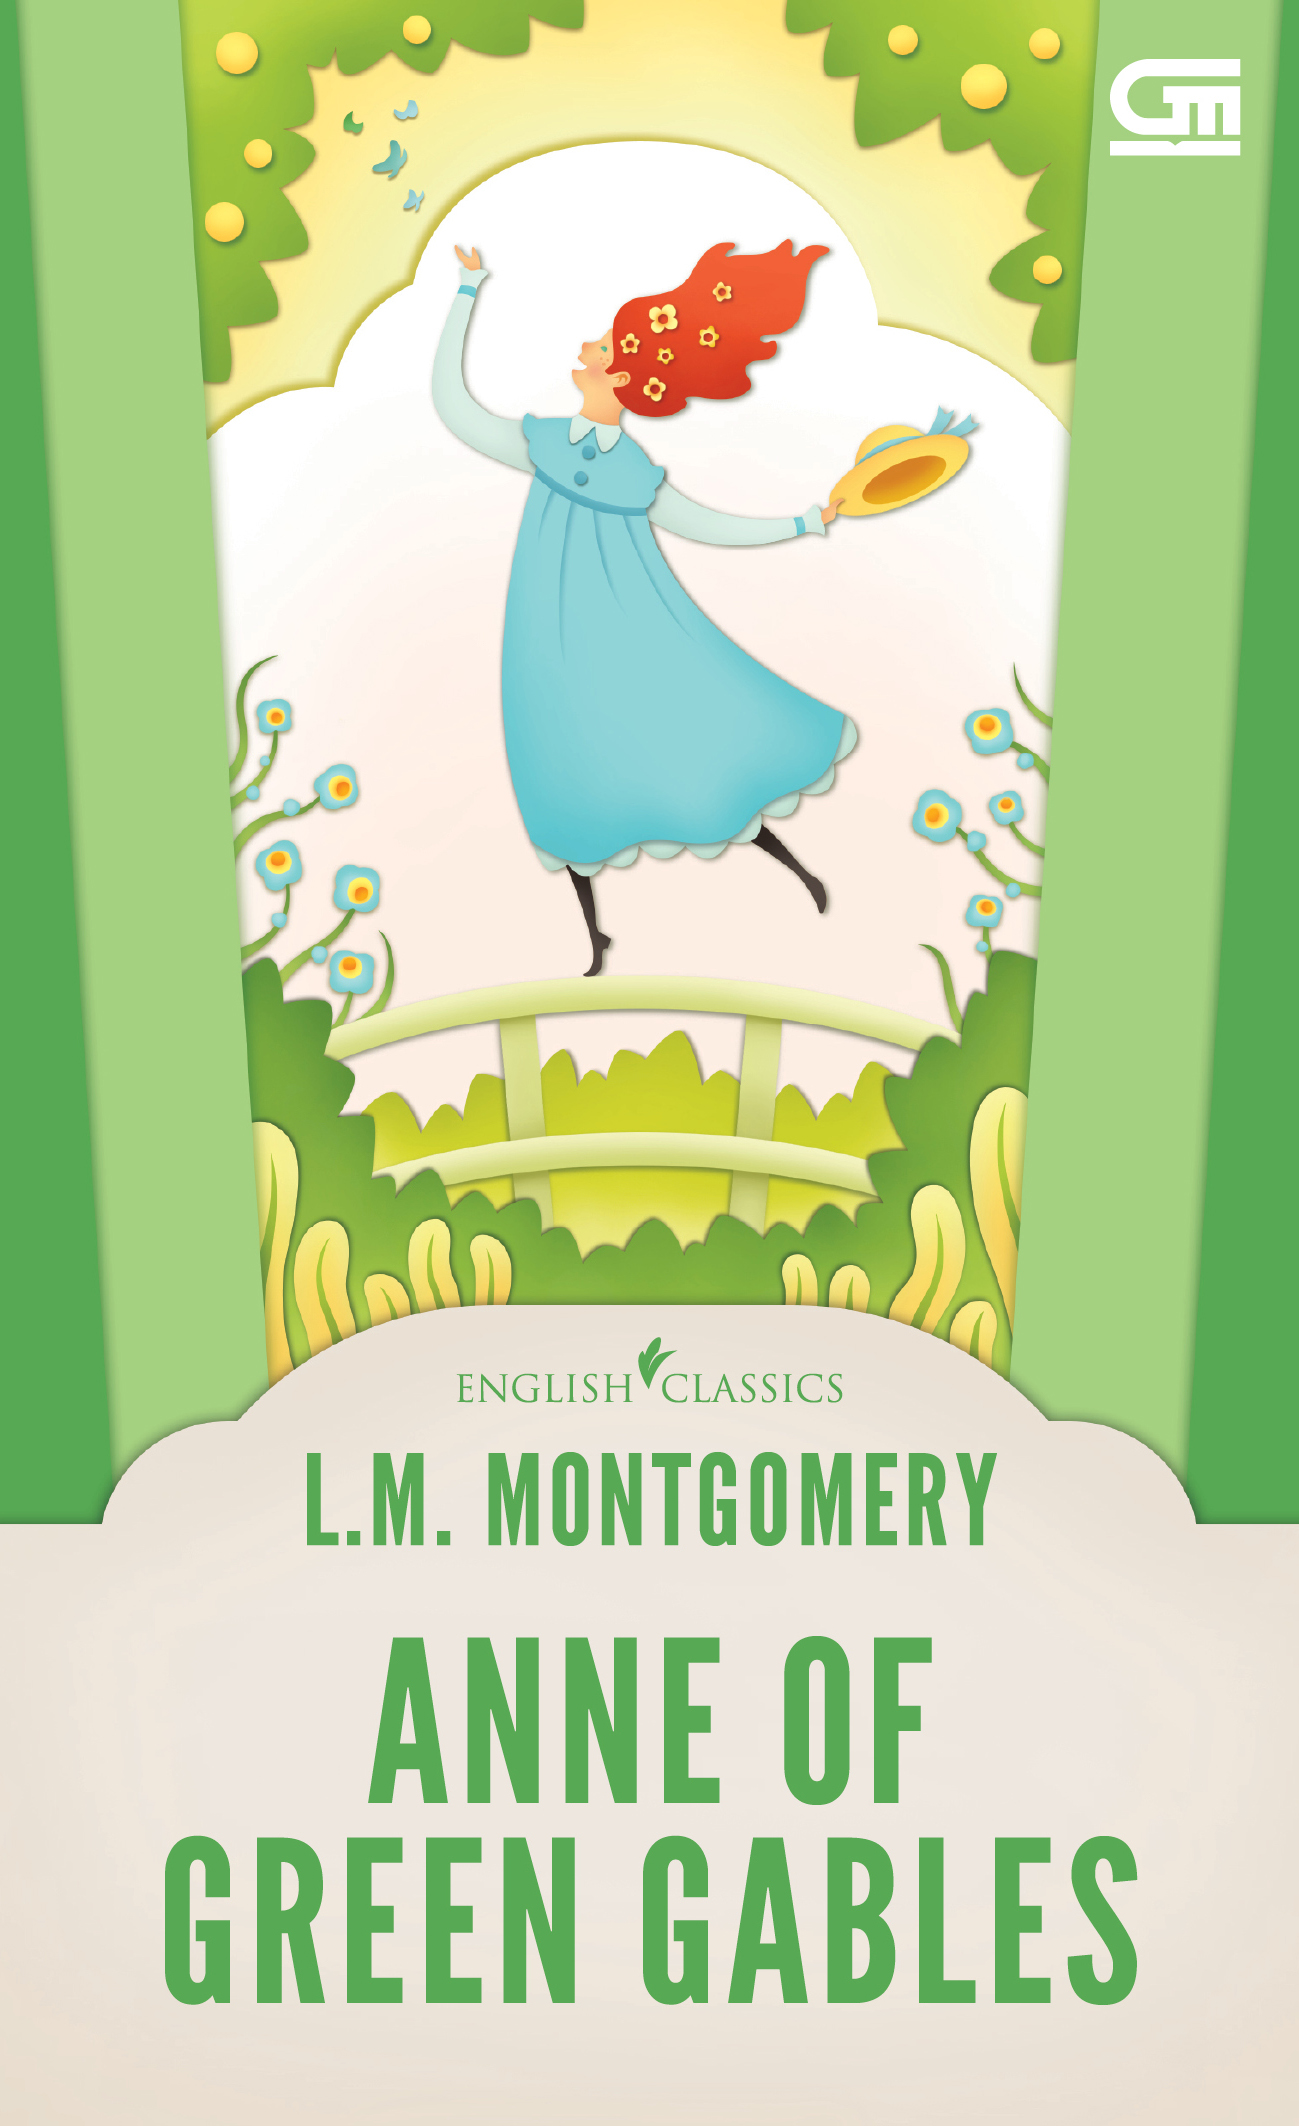 English Classics: Anne of Green Gables